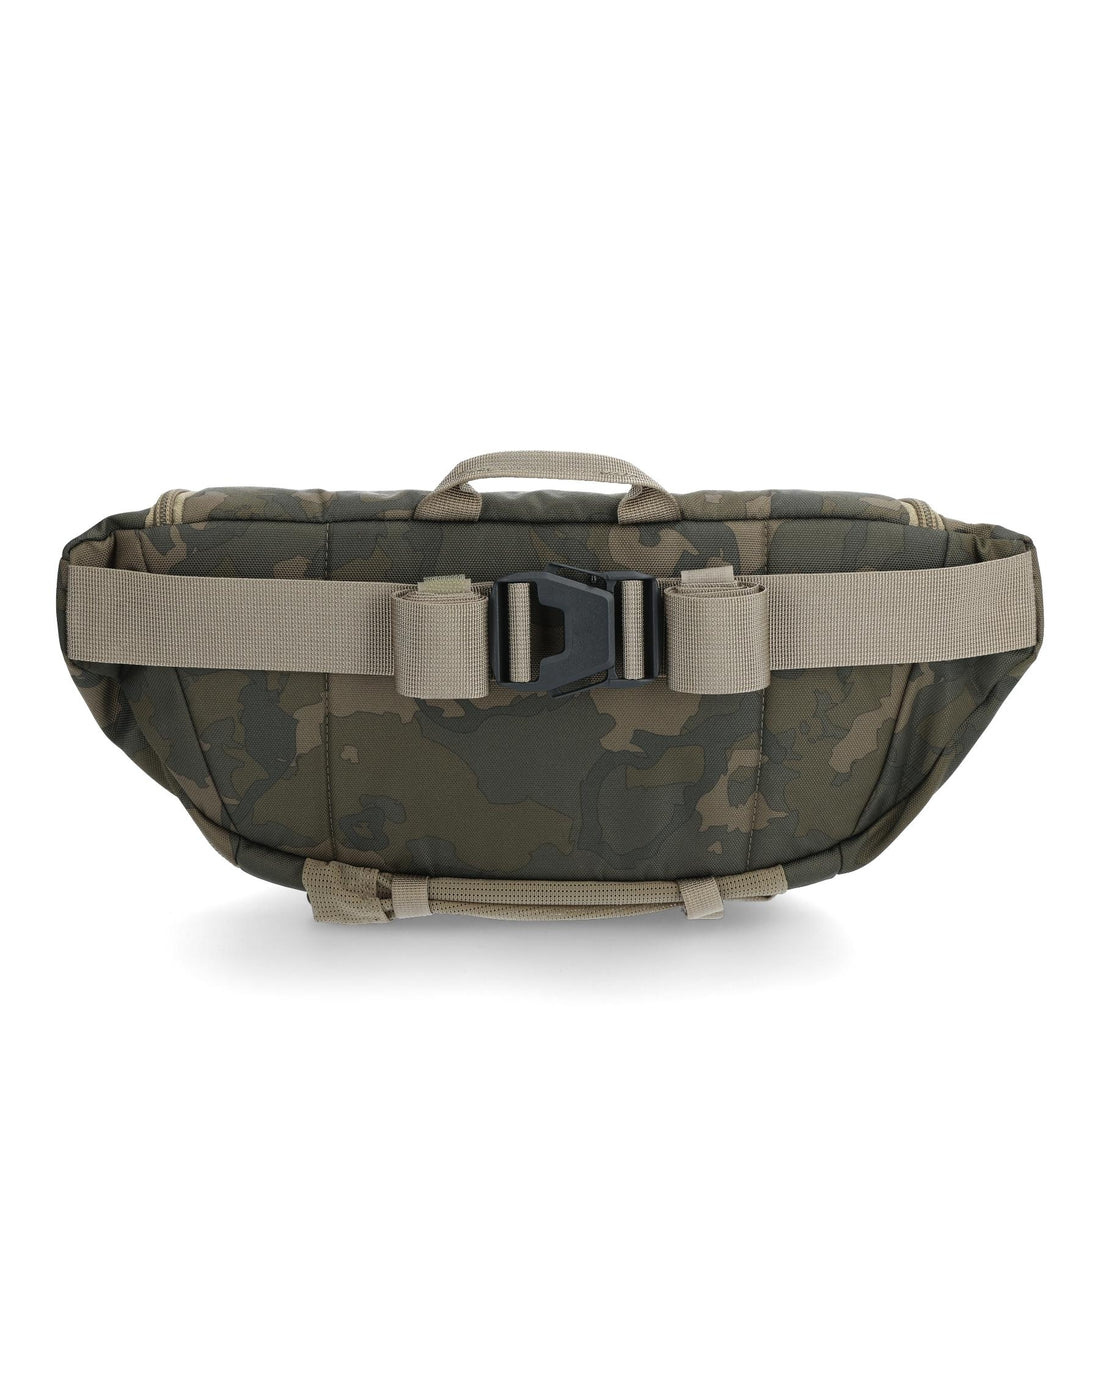 Simms Tributary Hip Pack Regiment Camo Olive Drab 